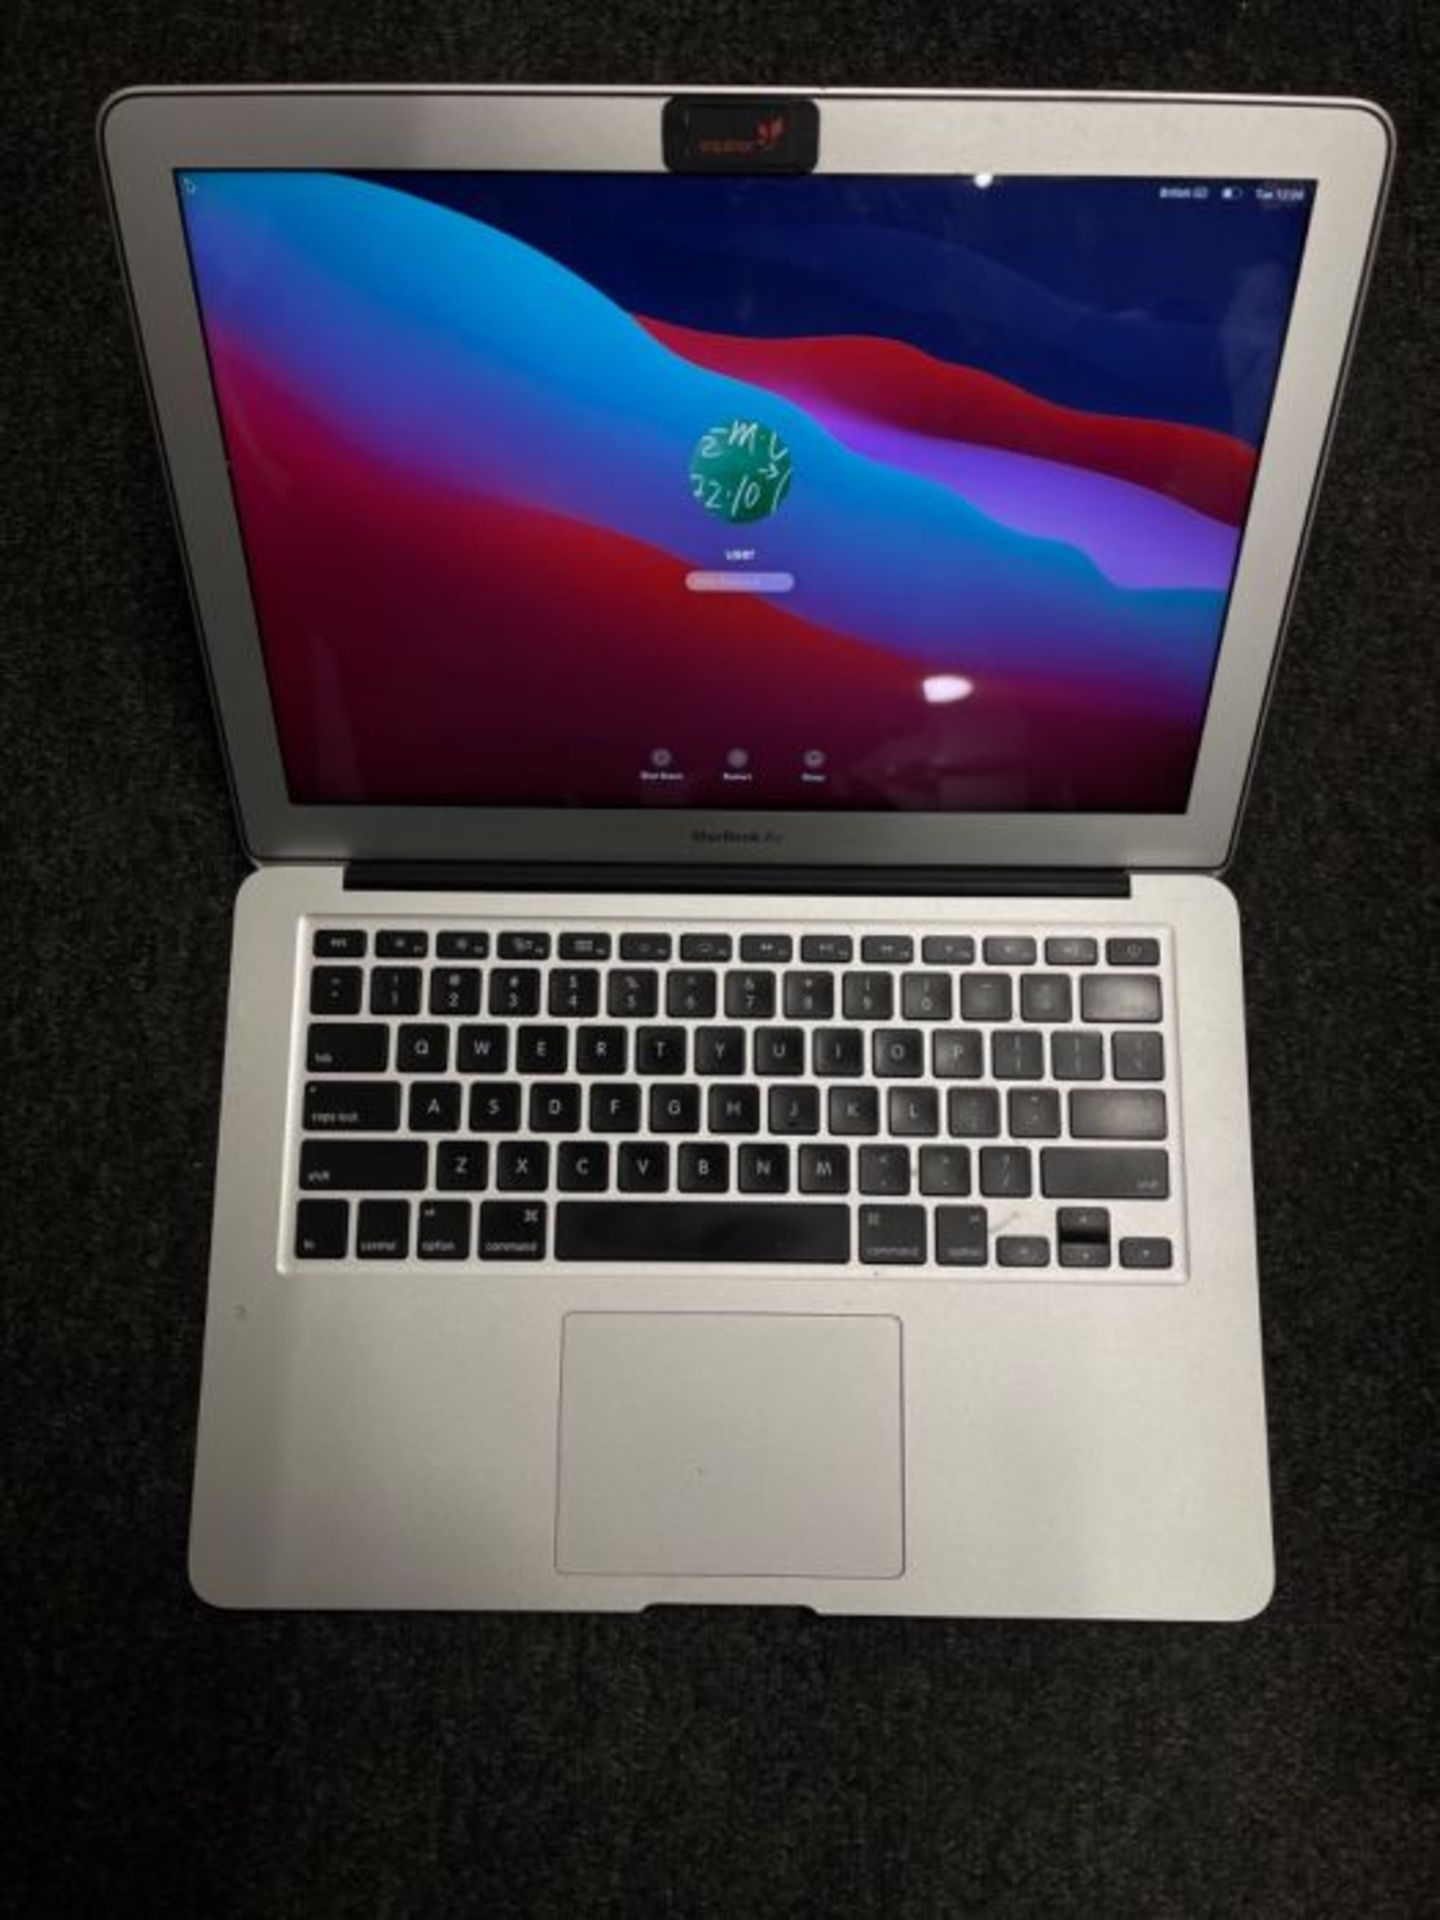 RRP £600.00 MacBook Air (13-inch, Early 2015) No Charger, in working order: Serial Number: C1MPFKM - Image 2 of 3